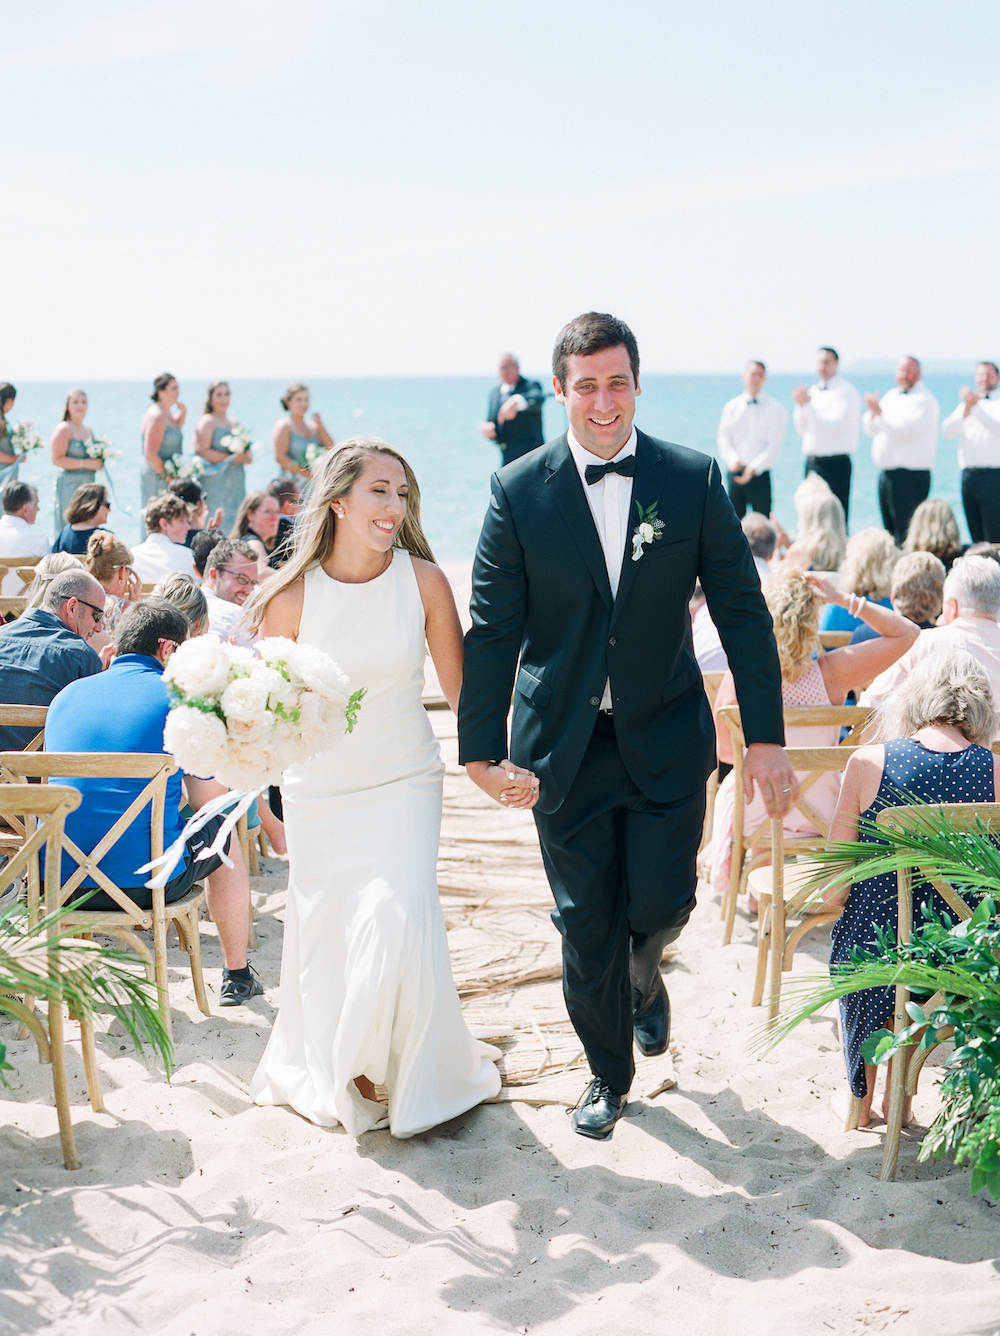 A couple smiling after their Glen Arbor, Michigan wedding